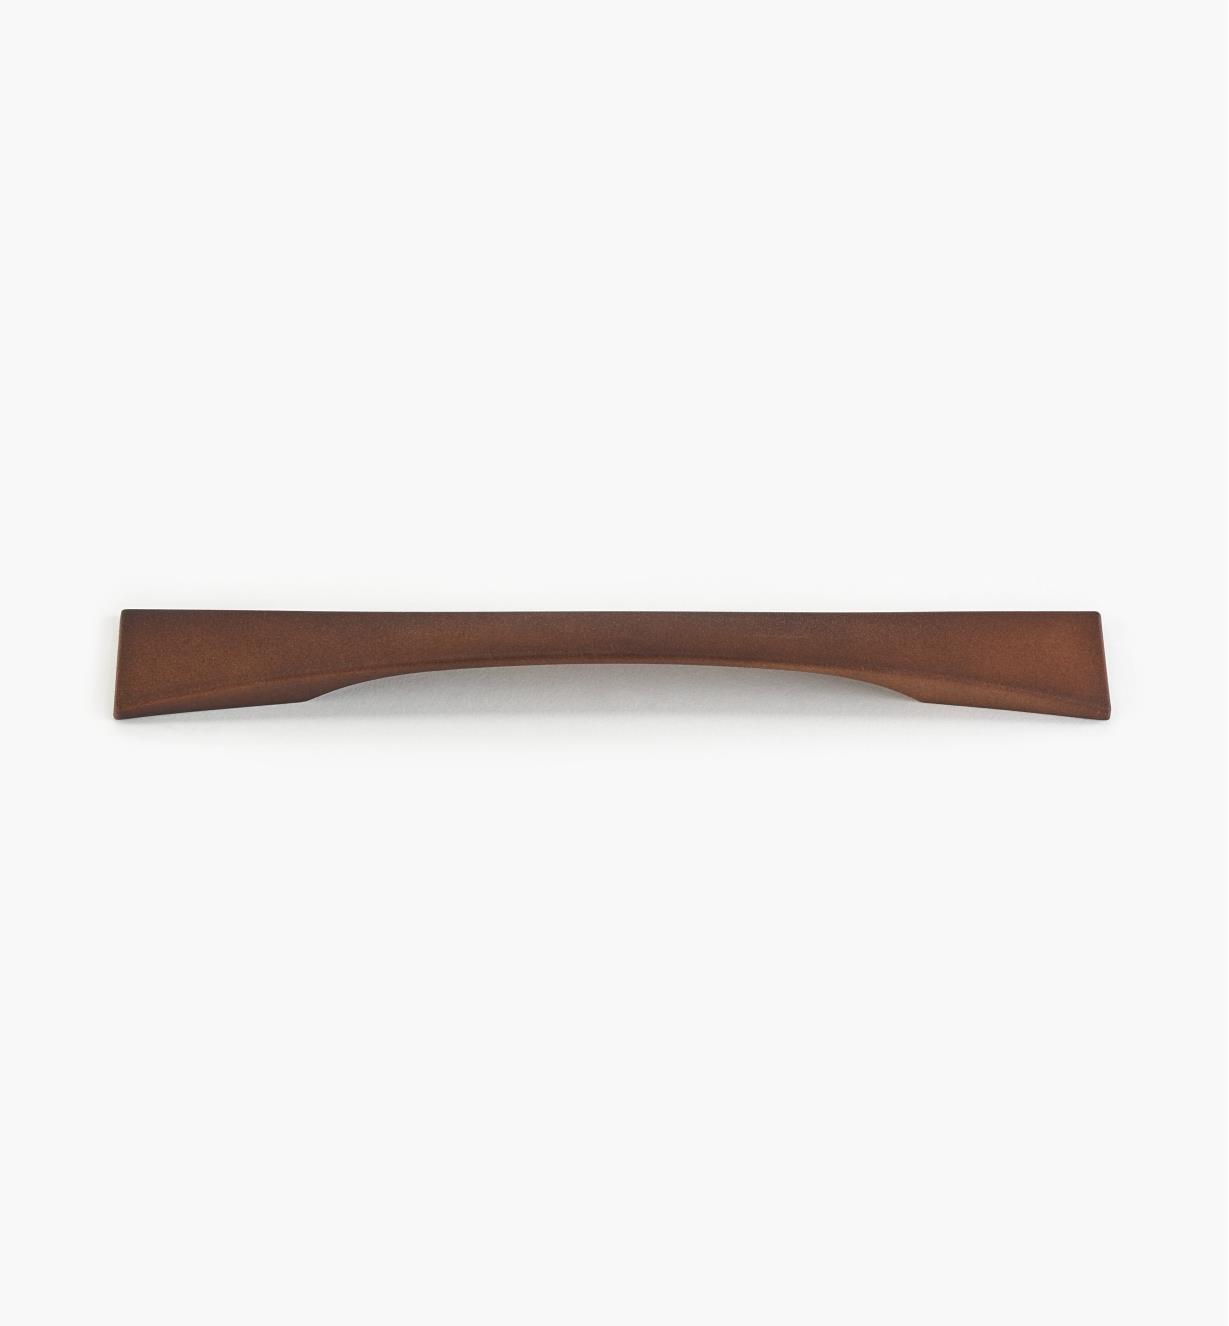 00A7431 - Musa 160mm (247mm) Oxidized Steel Handle